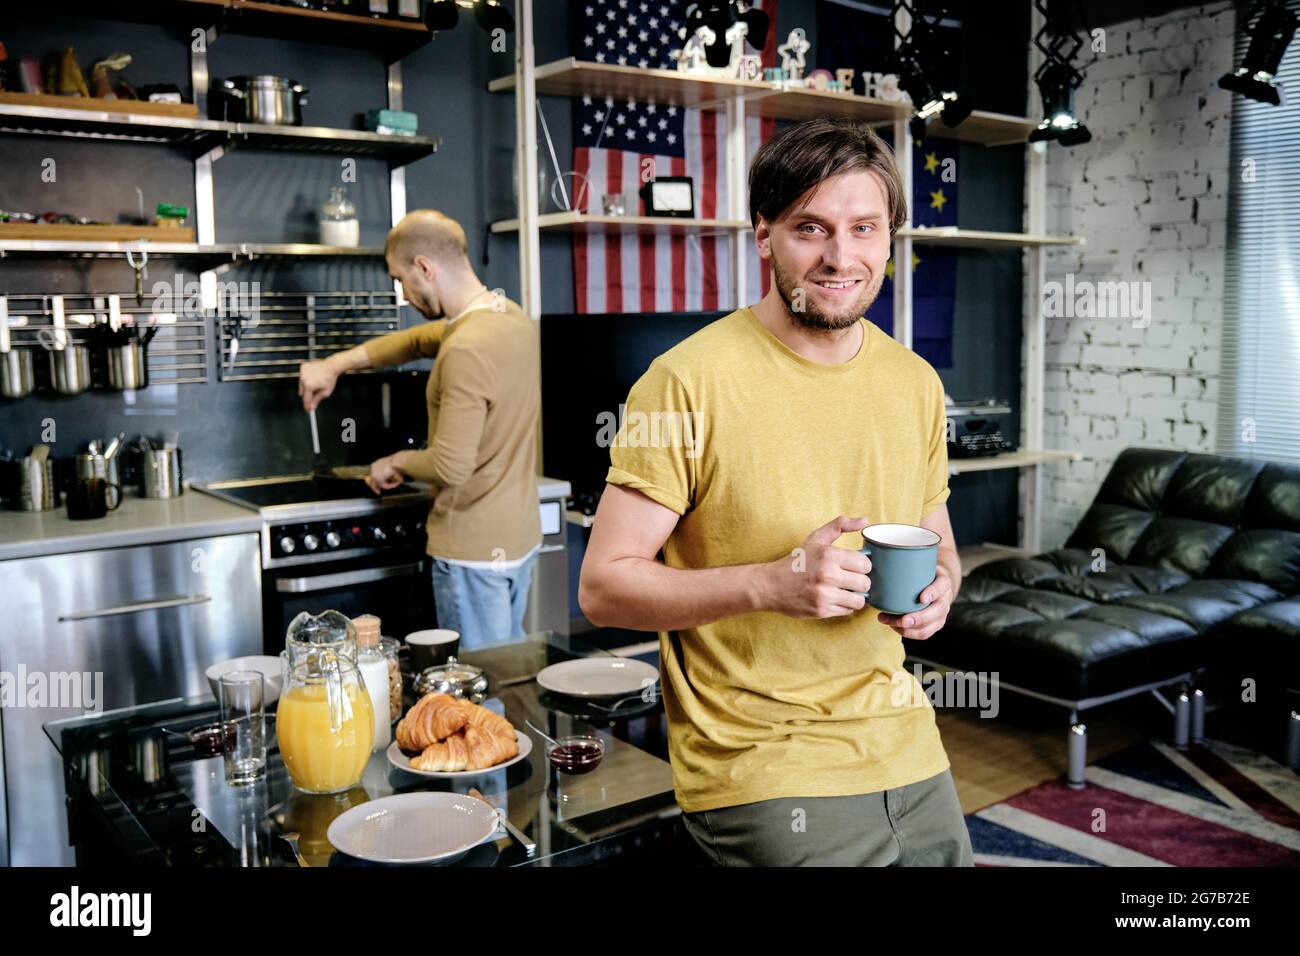 Handsome attractive smiling young man drinking cup morning coffee when his boyfriend cooking breakfast in background Stock Photo